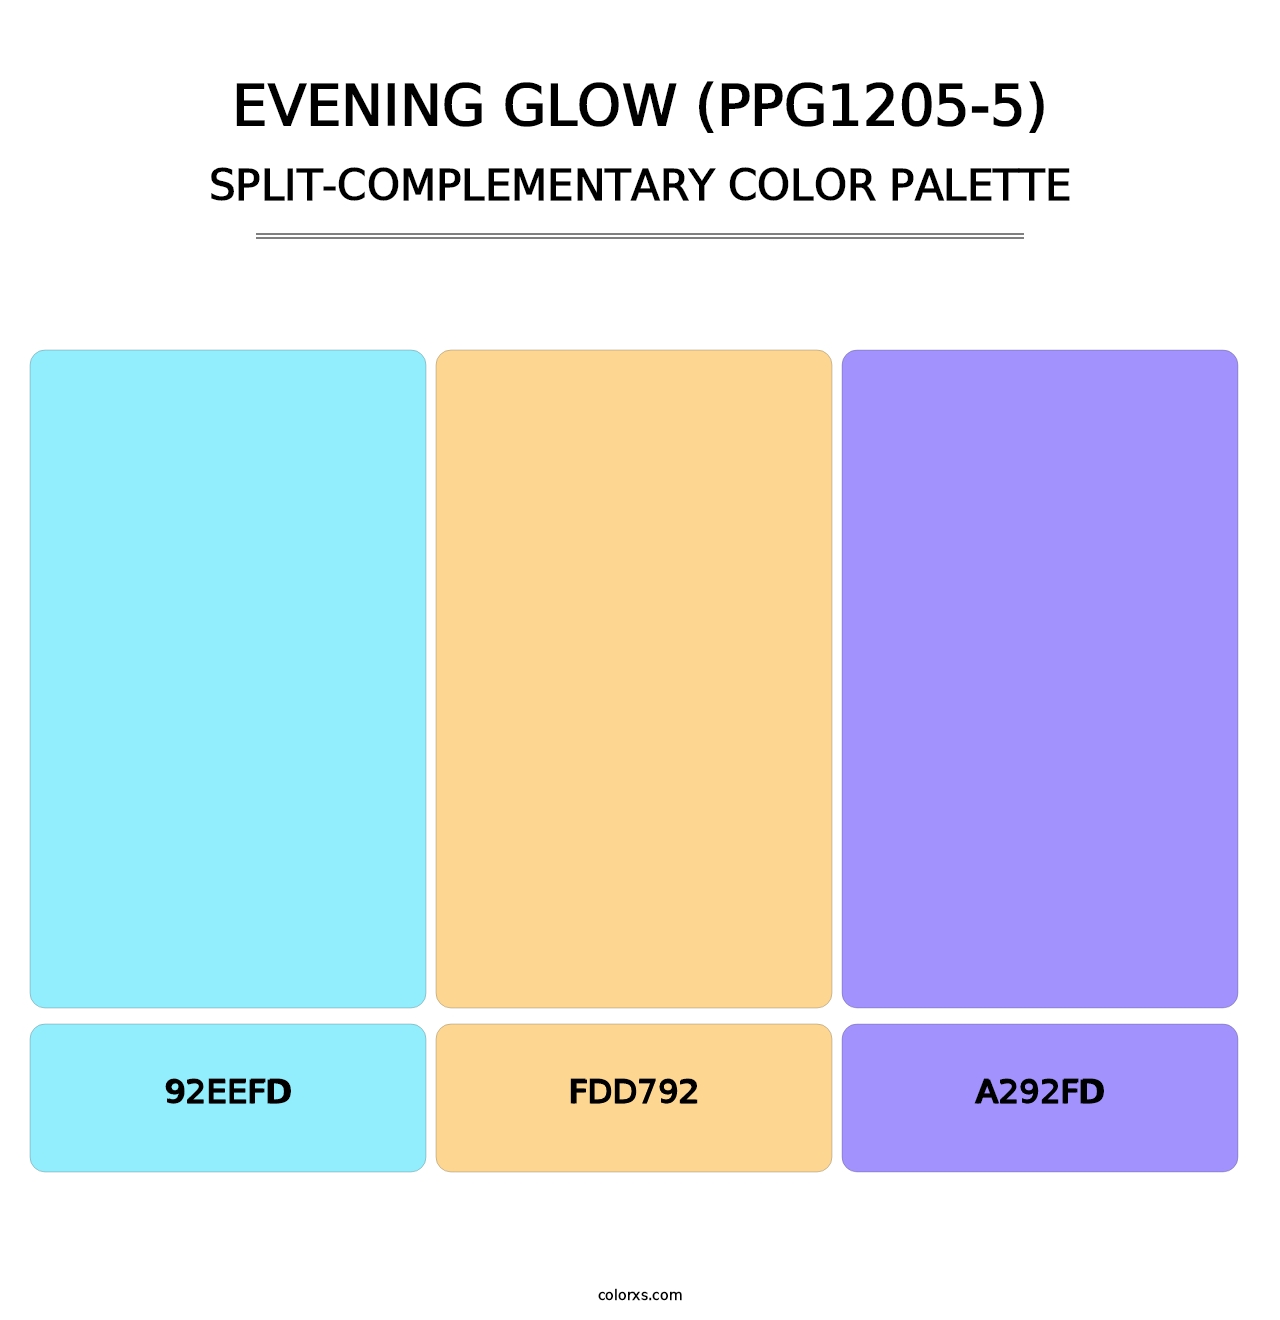 Evening Glow (PPG1205-5) - Split-Complementary Color Palette